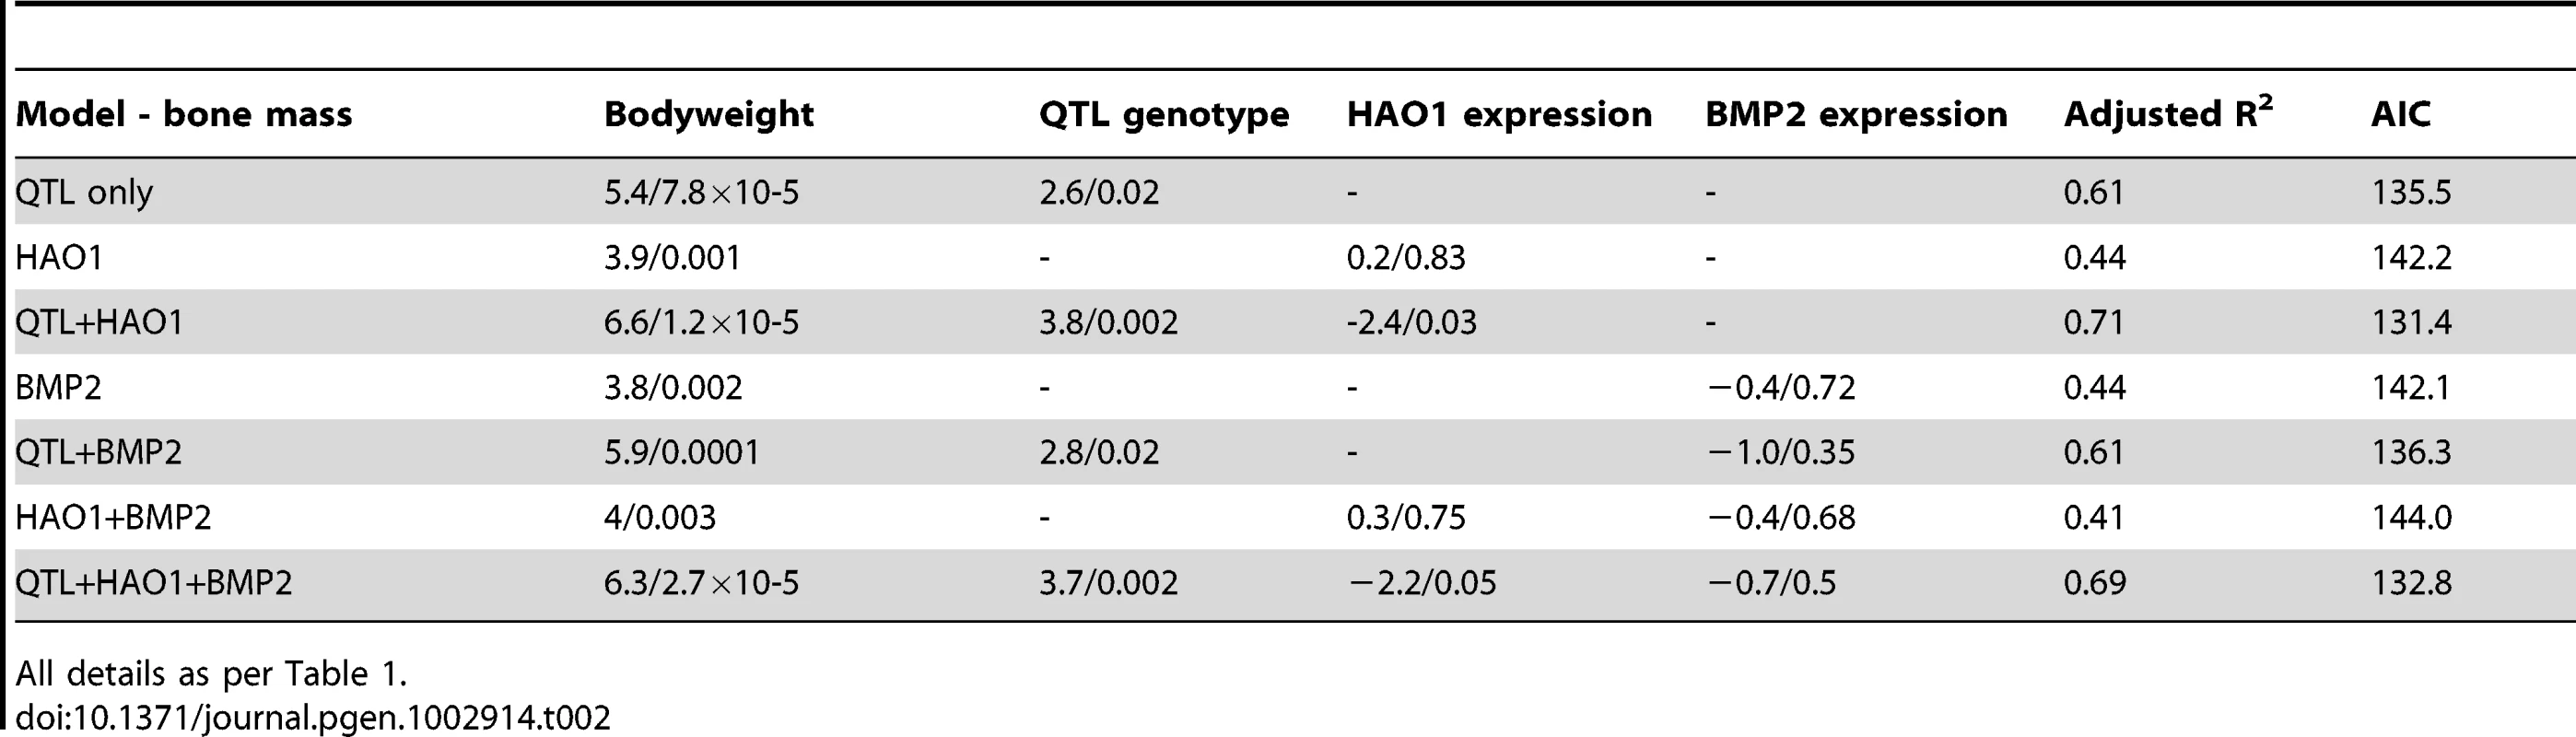 General Linear Model results for gene expression and QTL effect on bone mass.